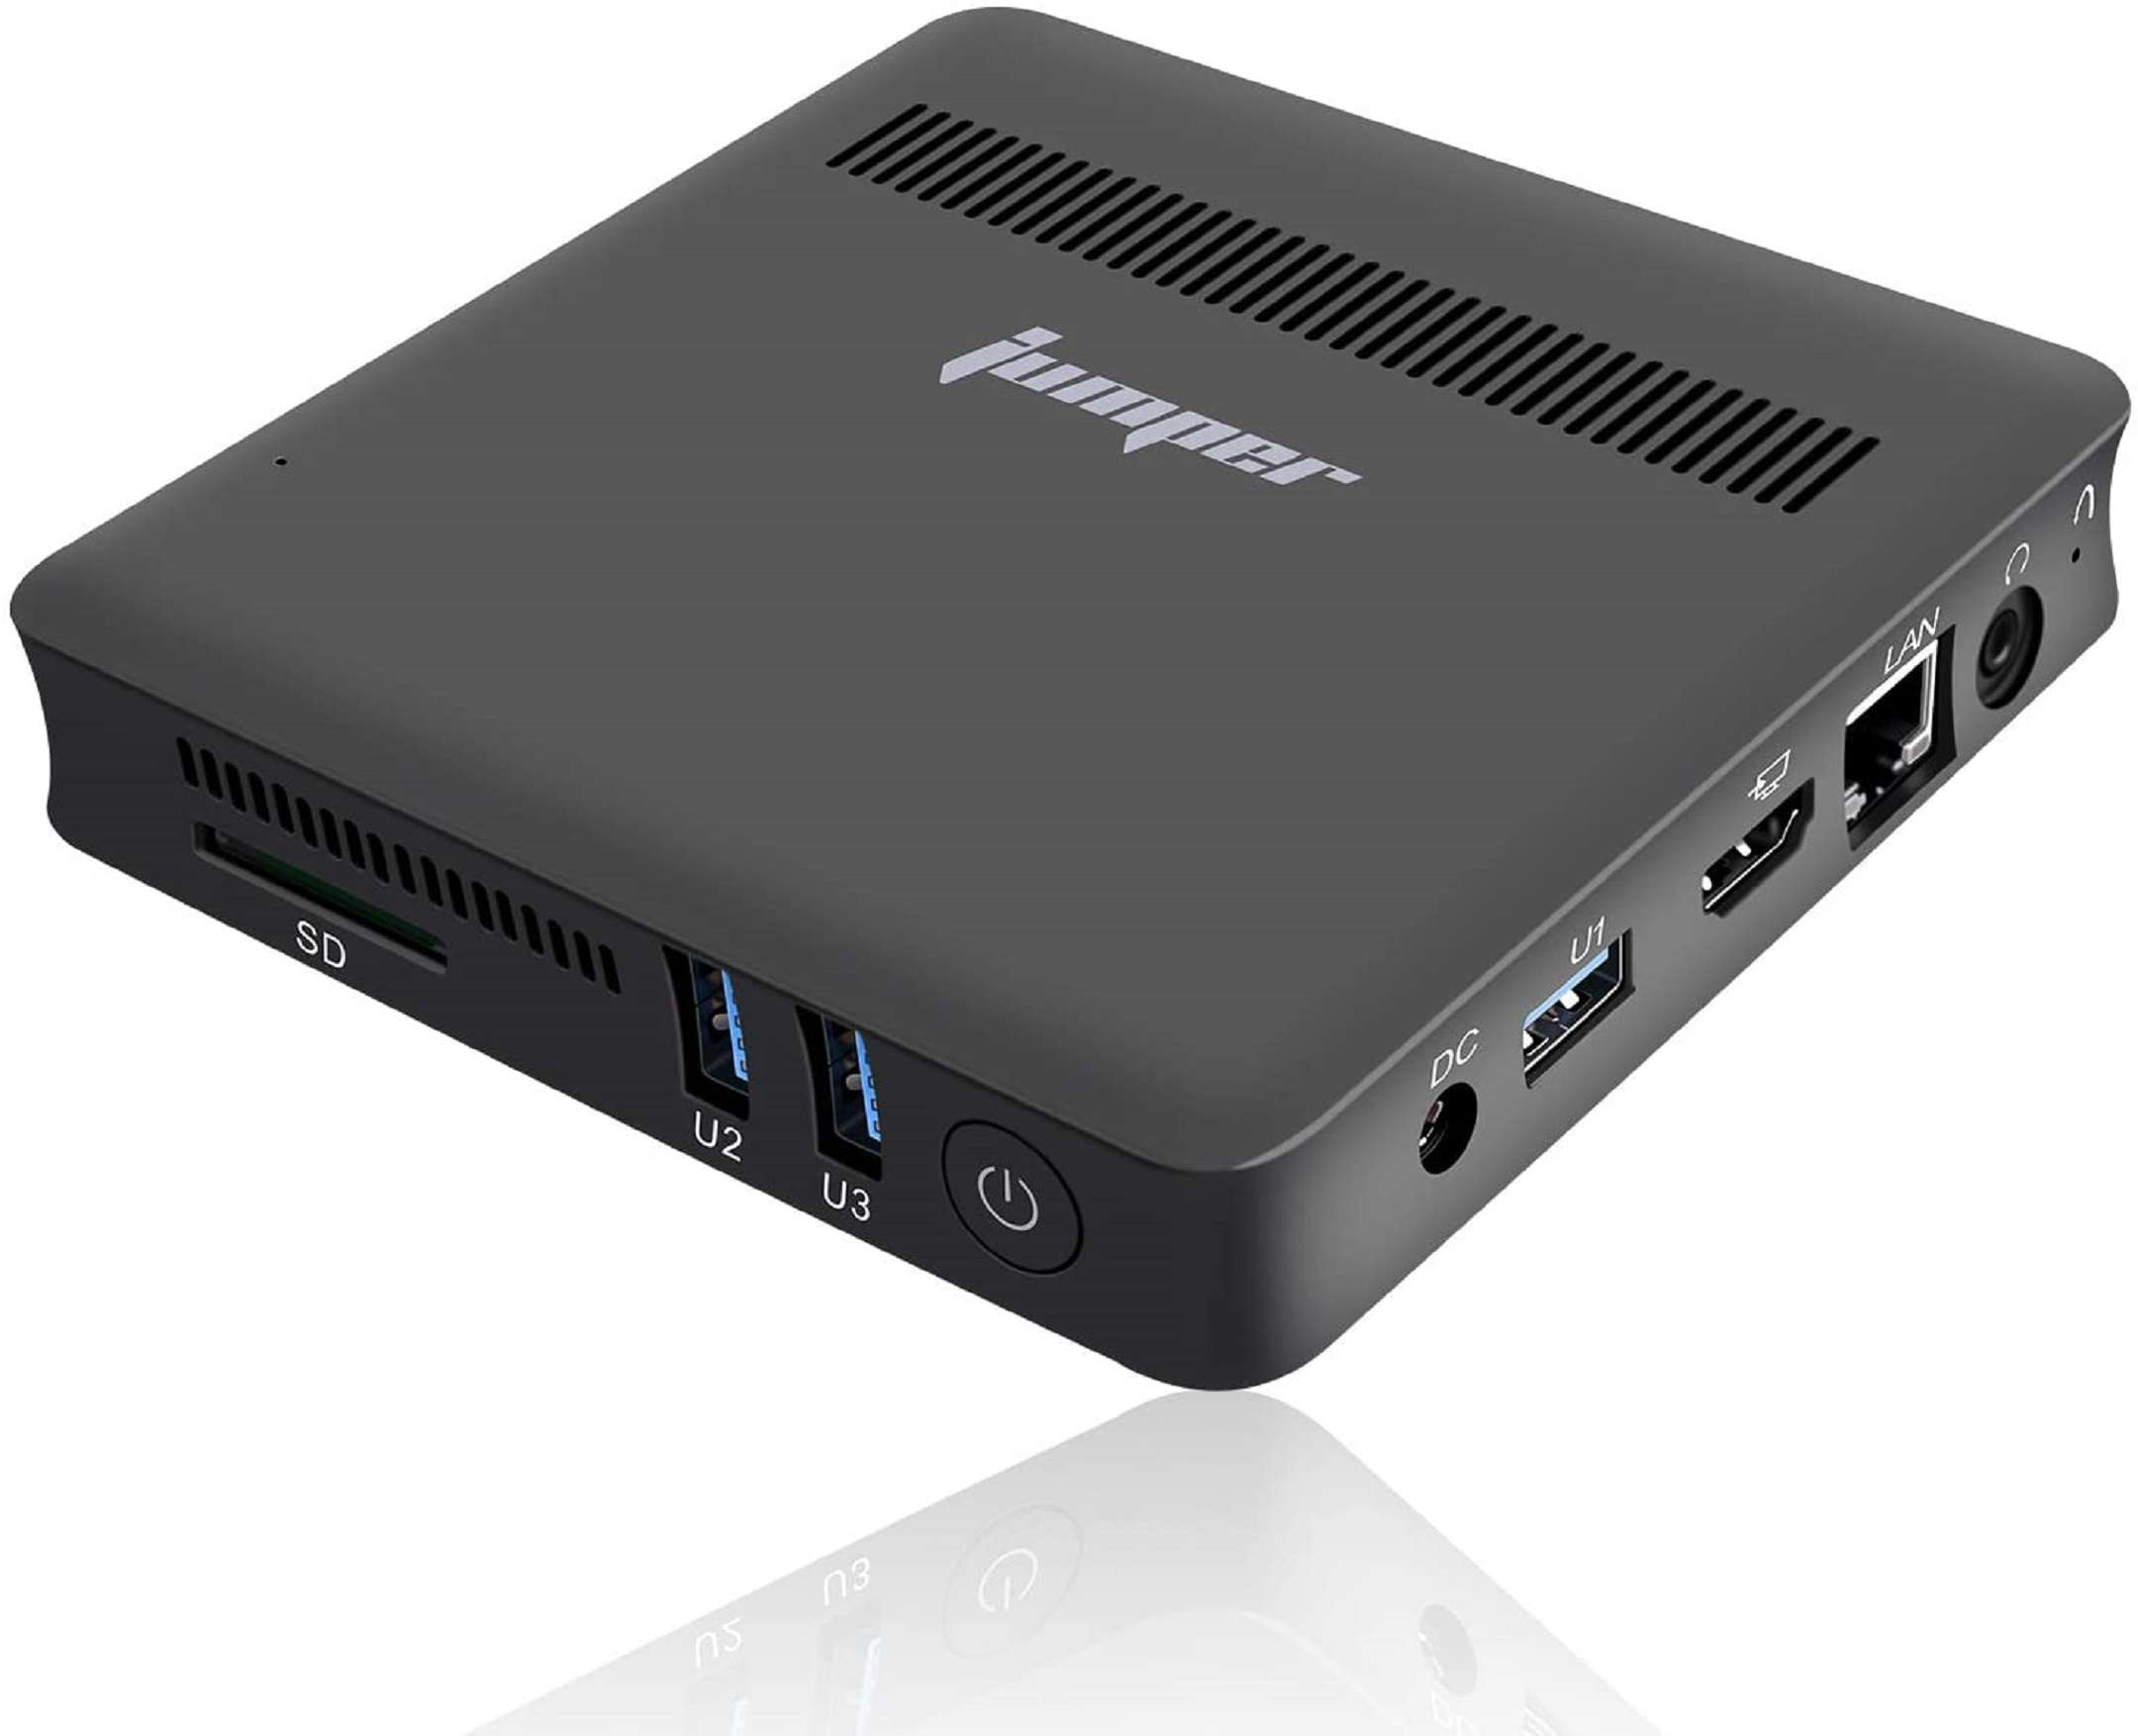 Mini PC Jumper for just over € 100 on Amazon